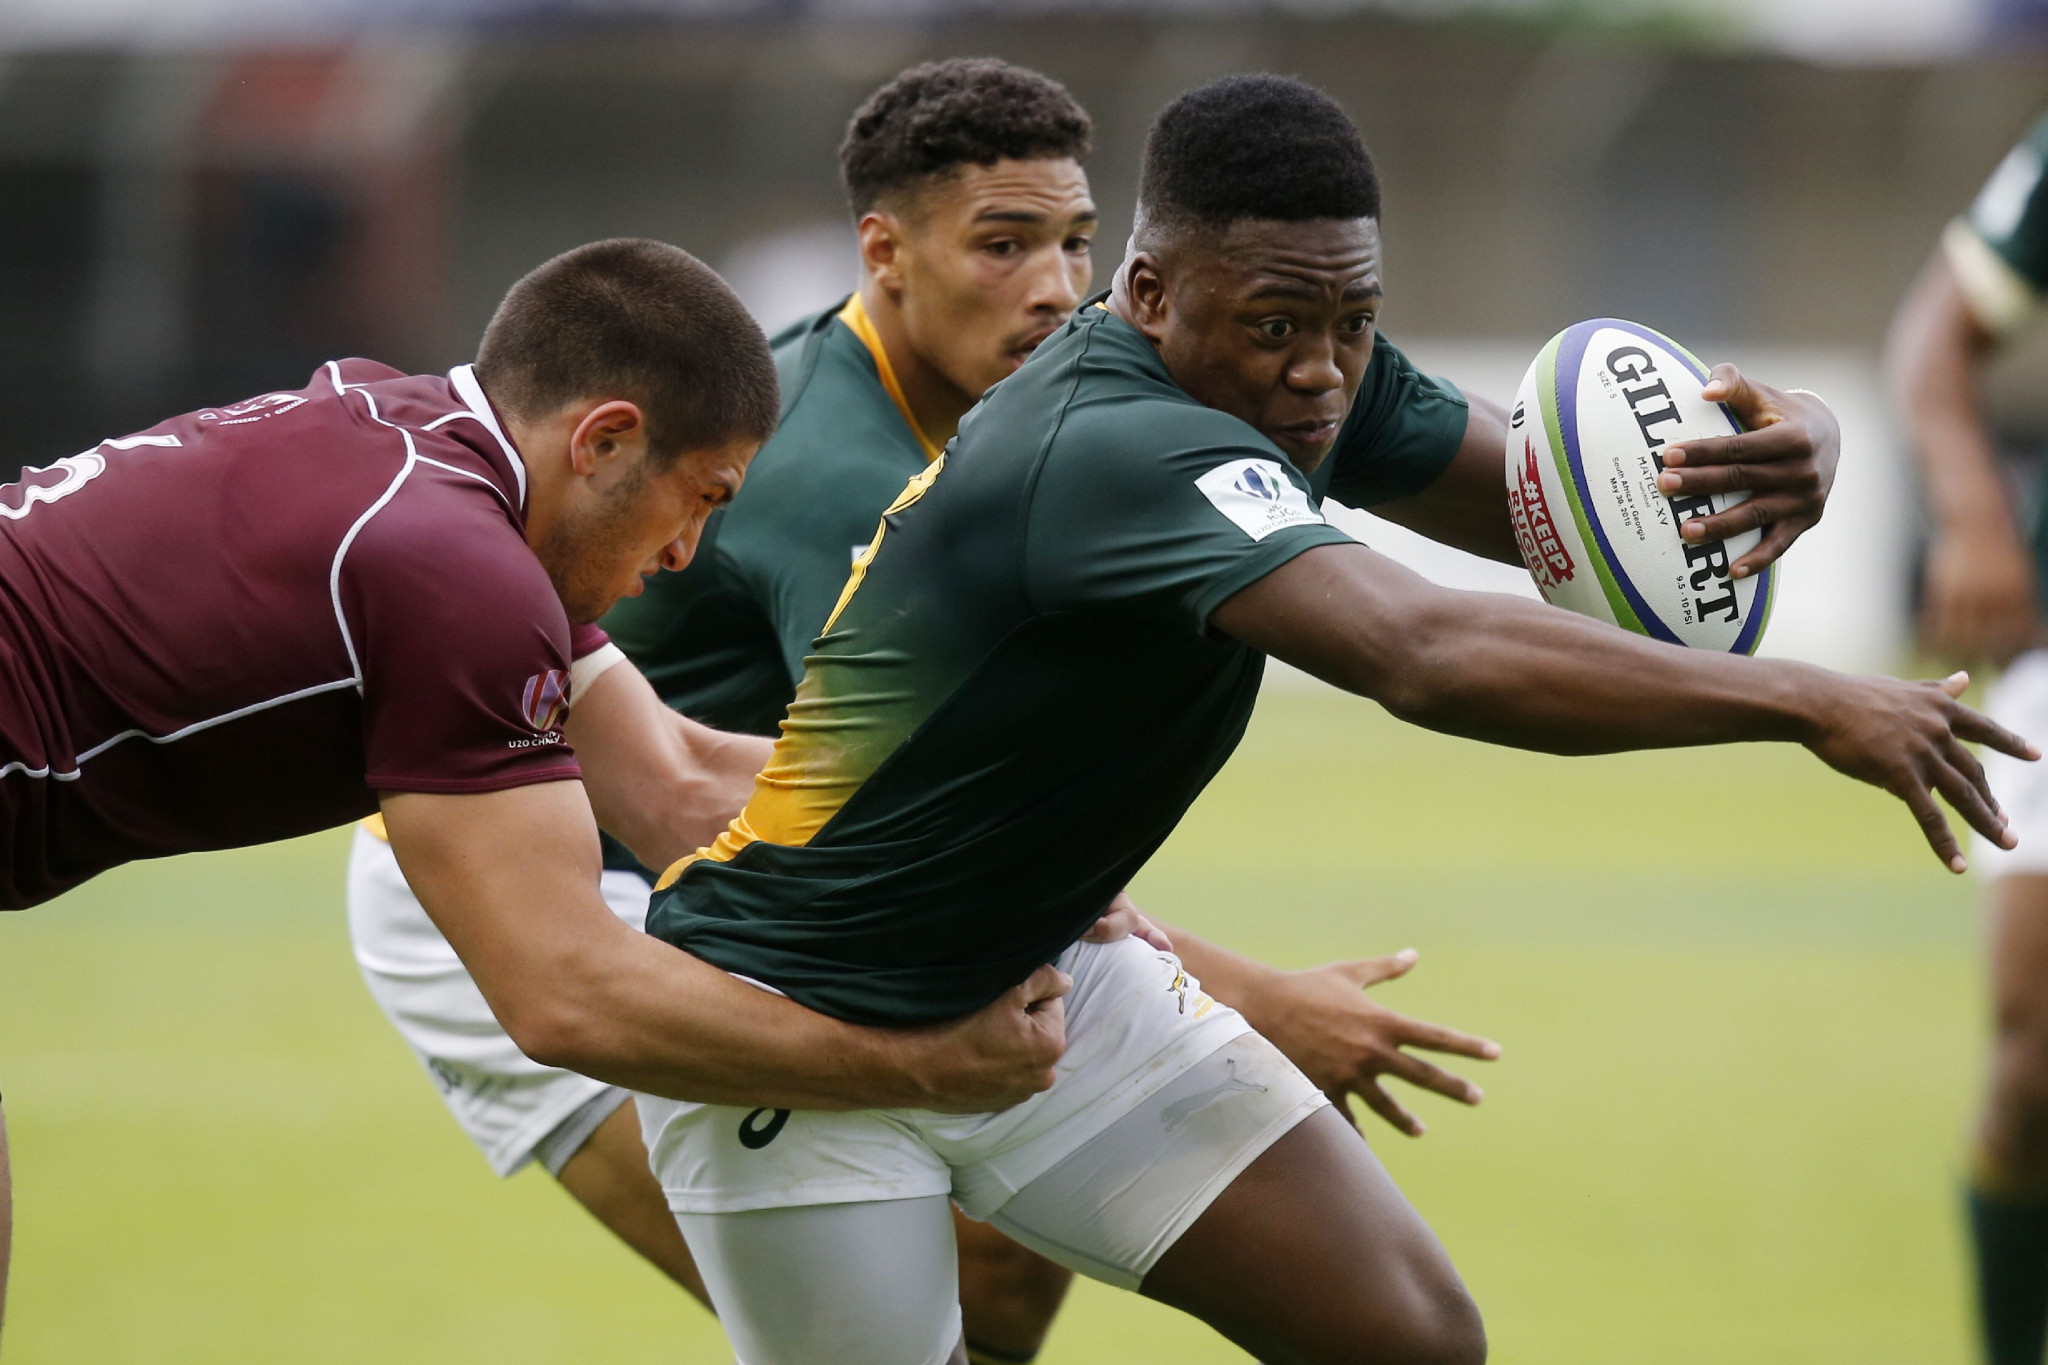 South Africa overcome tough Georgia challenge to open World Rugby Under-20 Championship 